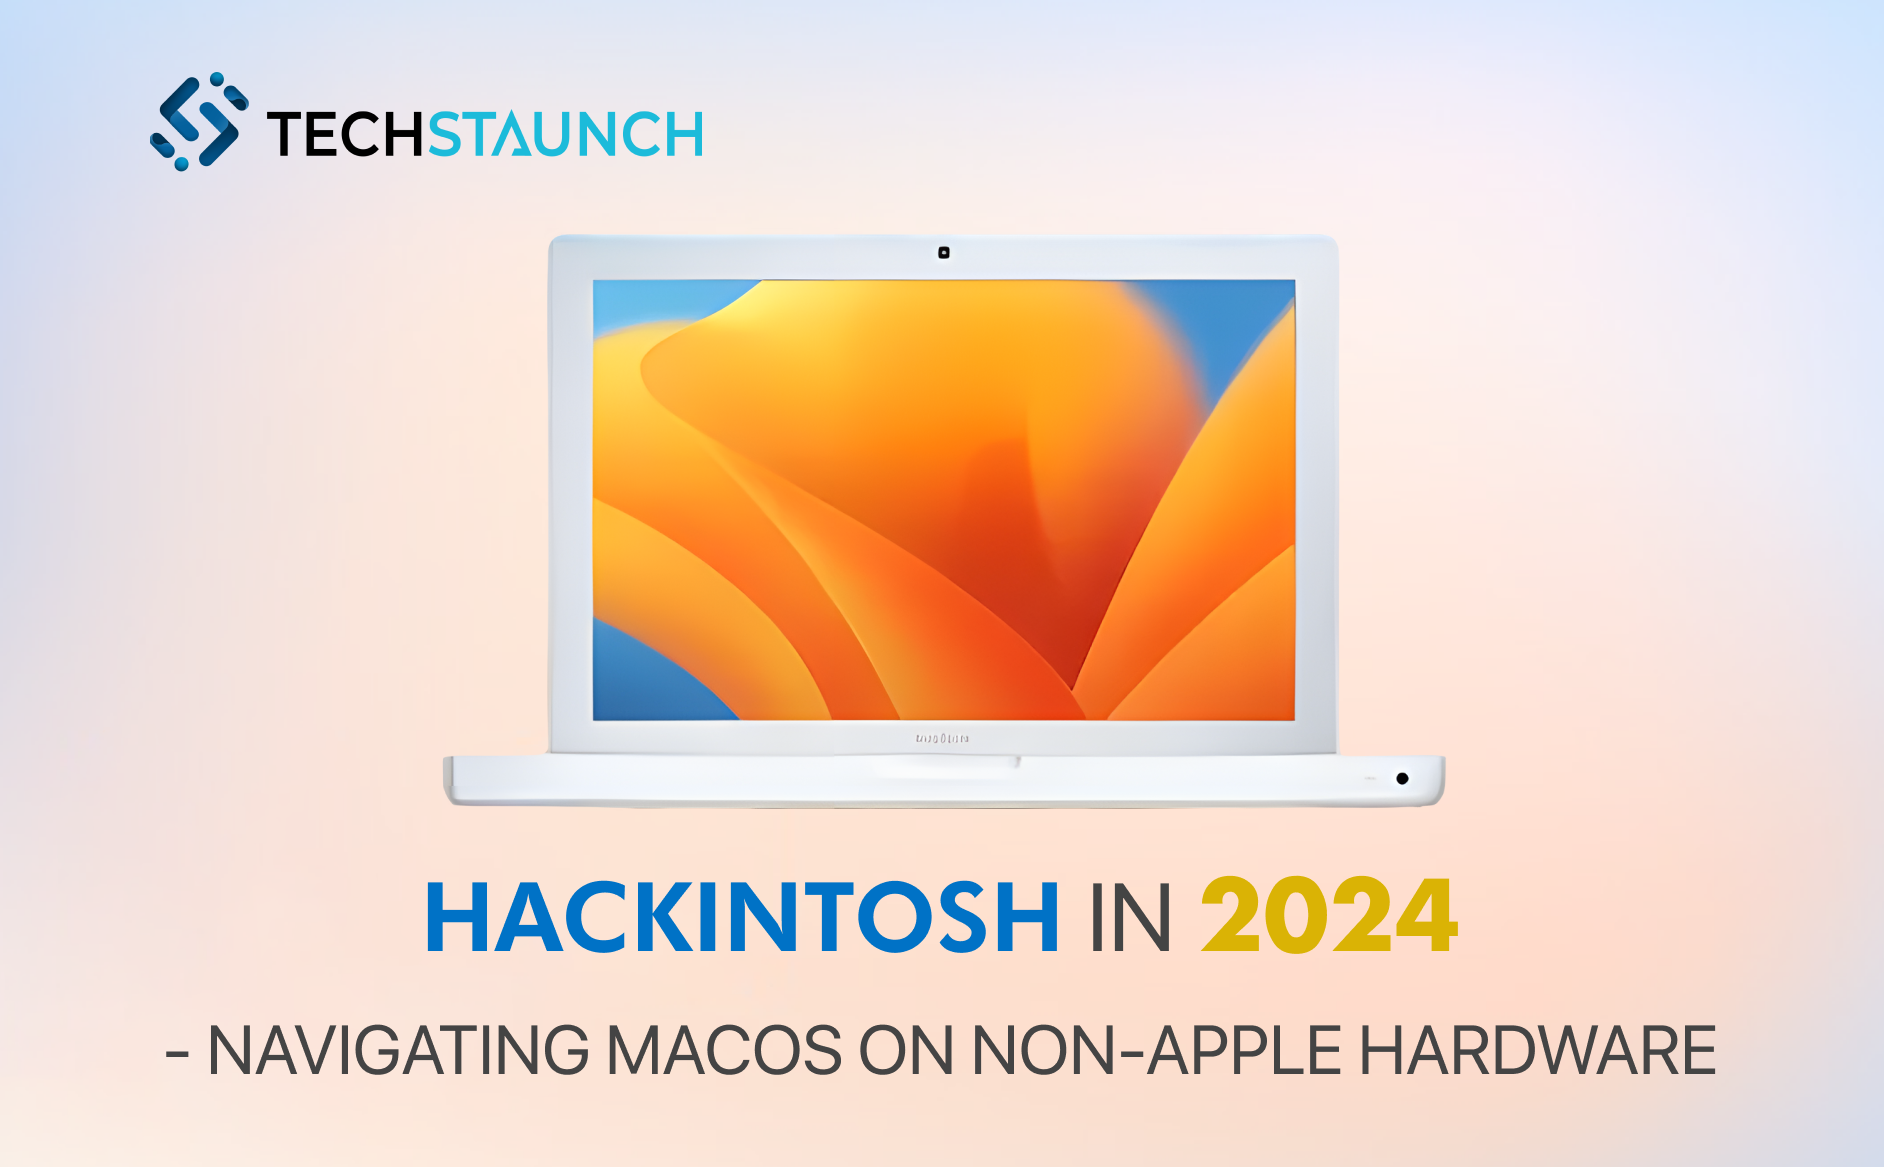 Hackintosh in 2024: Navigating macOS on Non-Apple Hardware